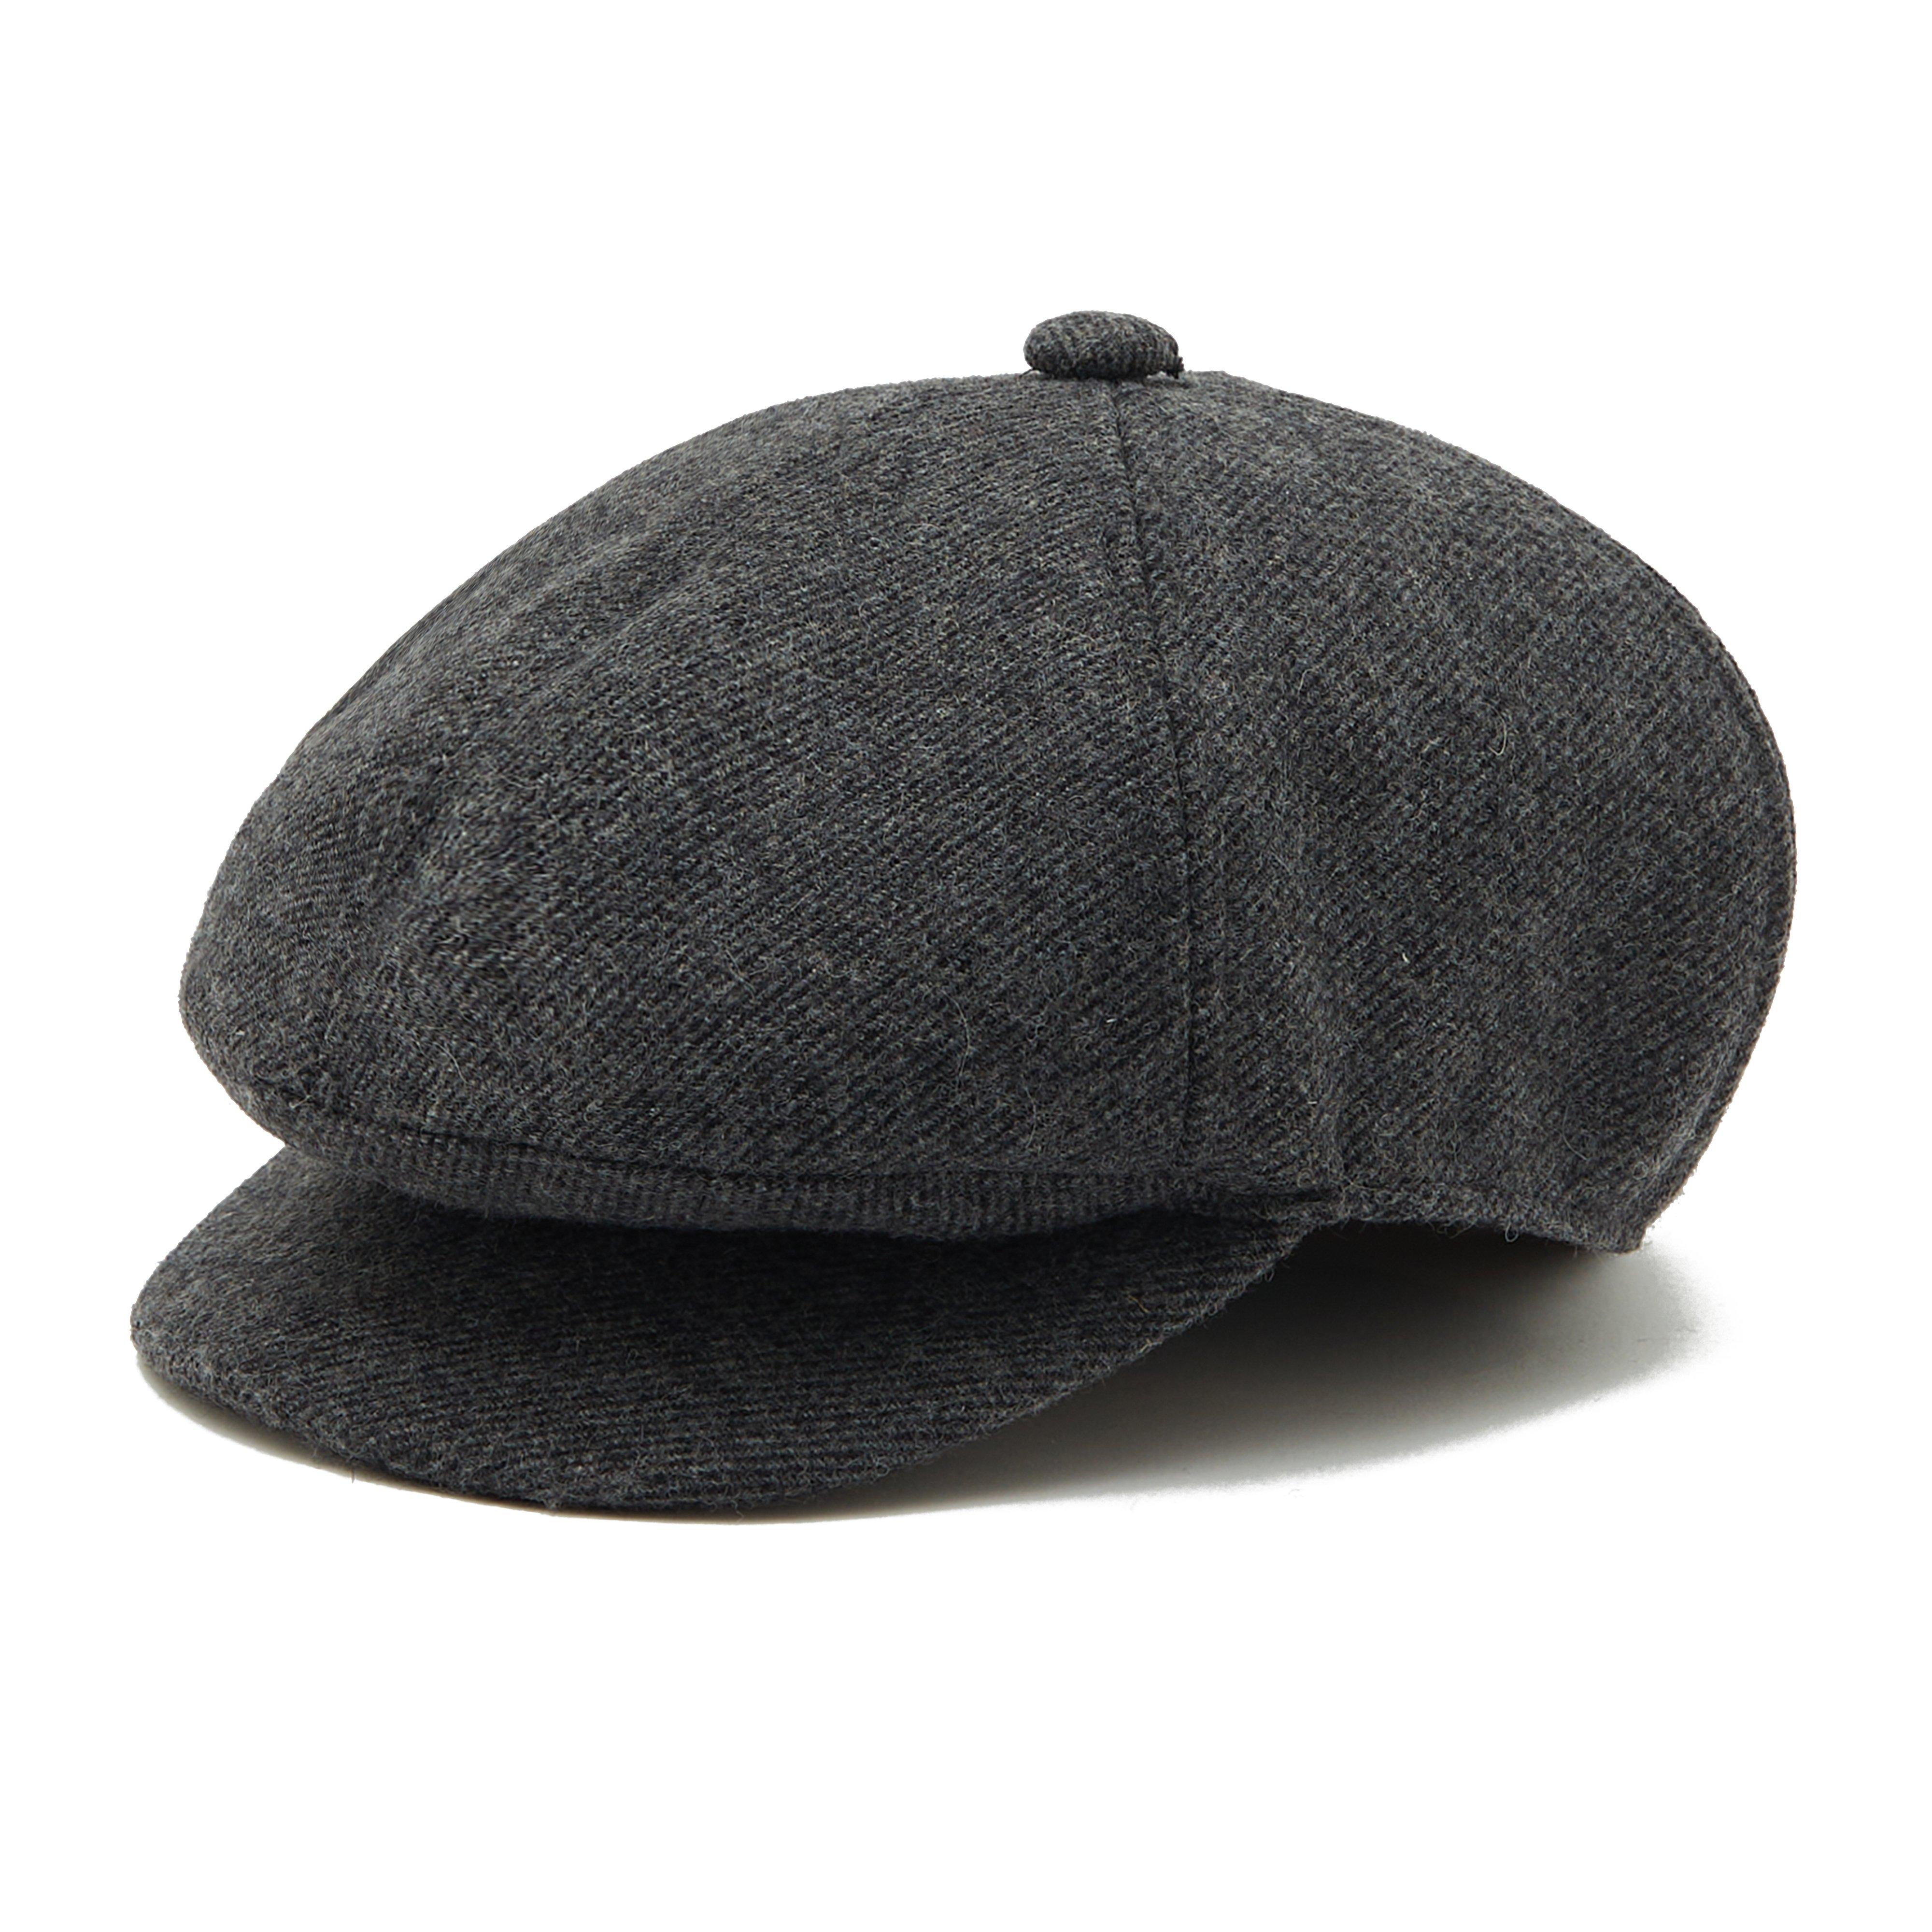 Claymore Bakerboy Hat Charcoal